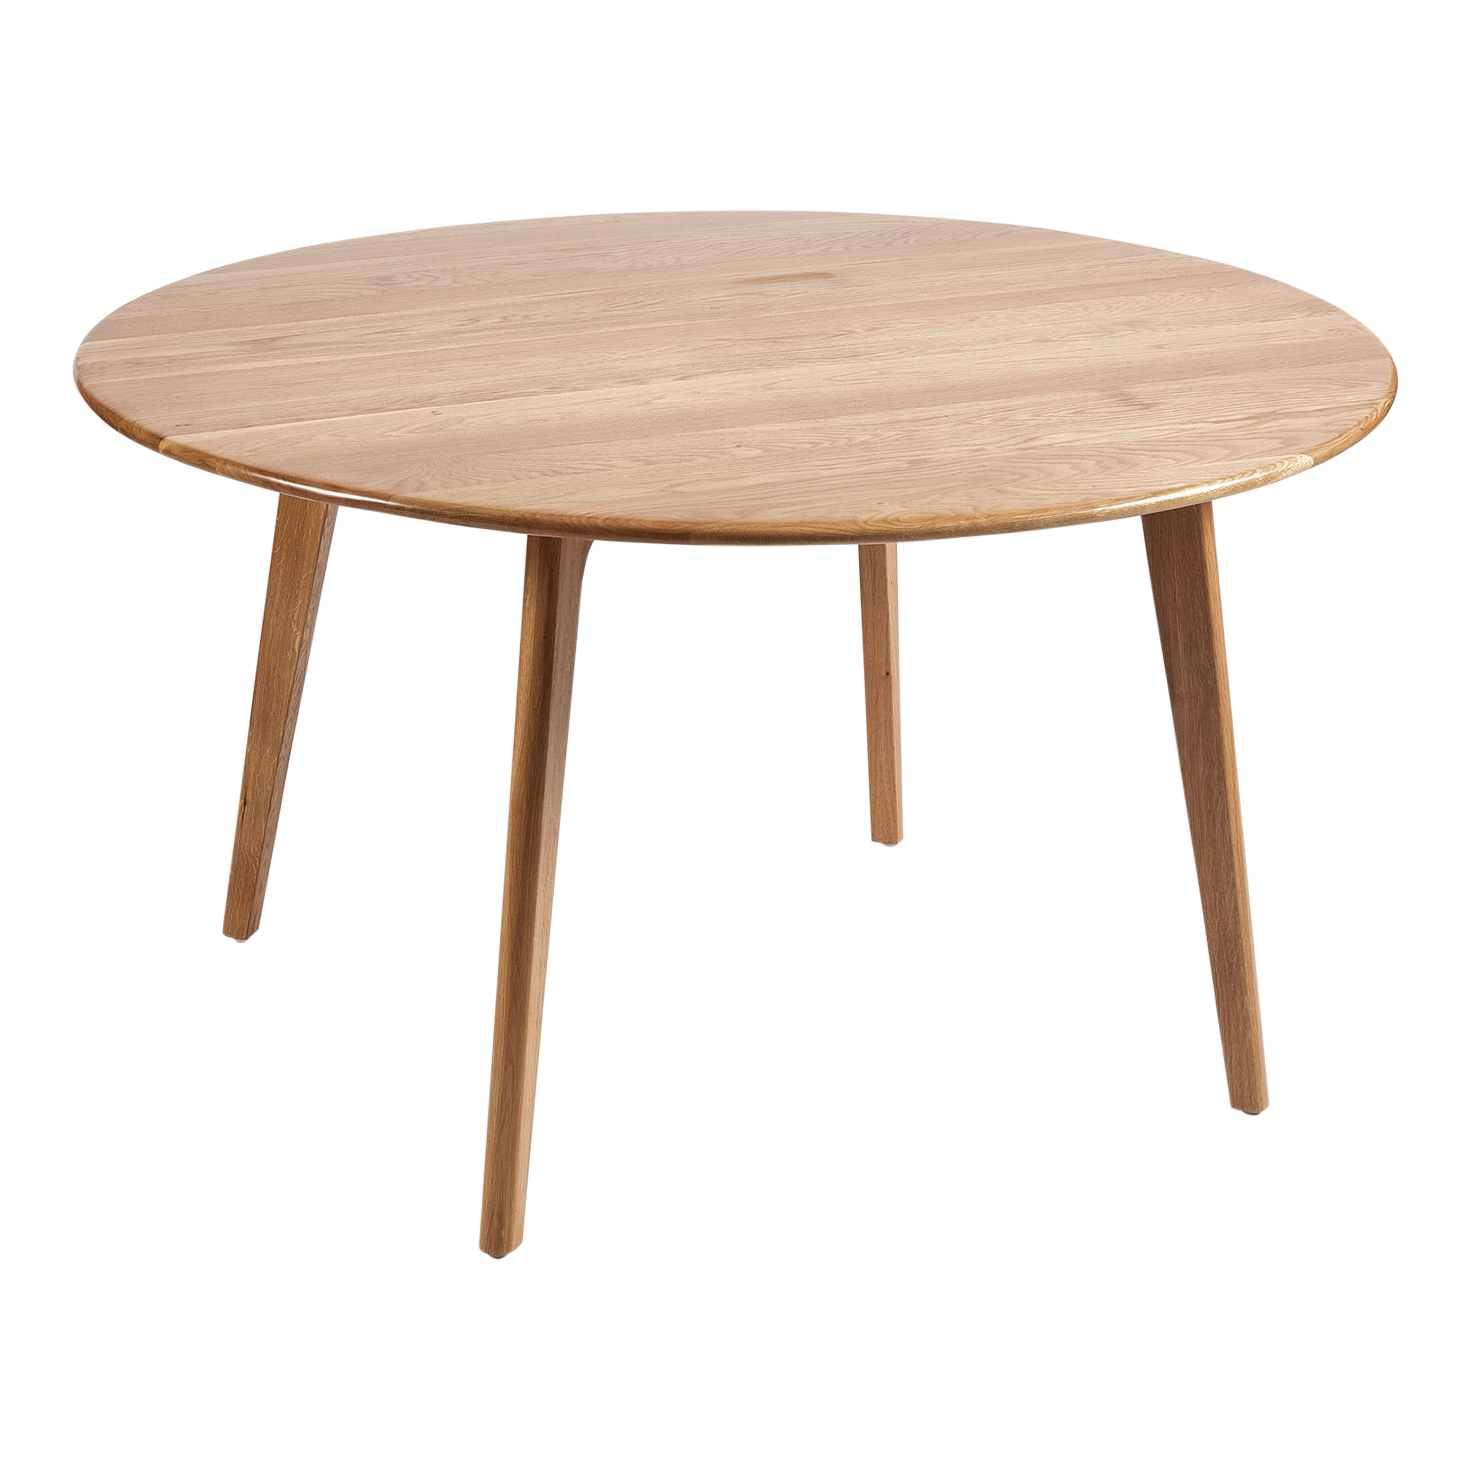 New Convair Oak Round Dining Table 6ixty Dining Tables Ebay